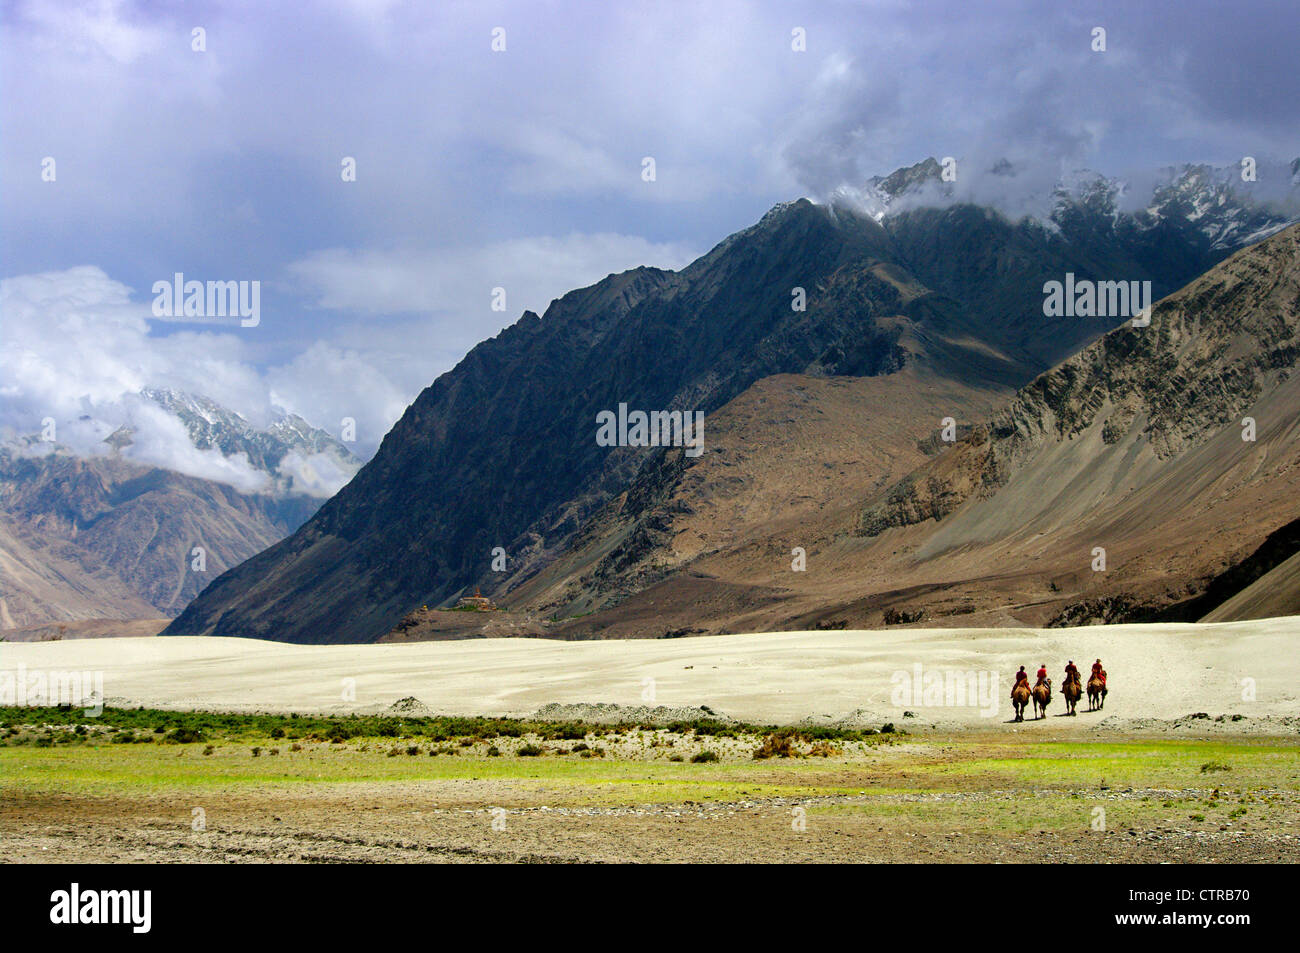 a group of Camel riders crossing the desert in the Nubra valley, Ladakh, India Stock Photo